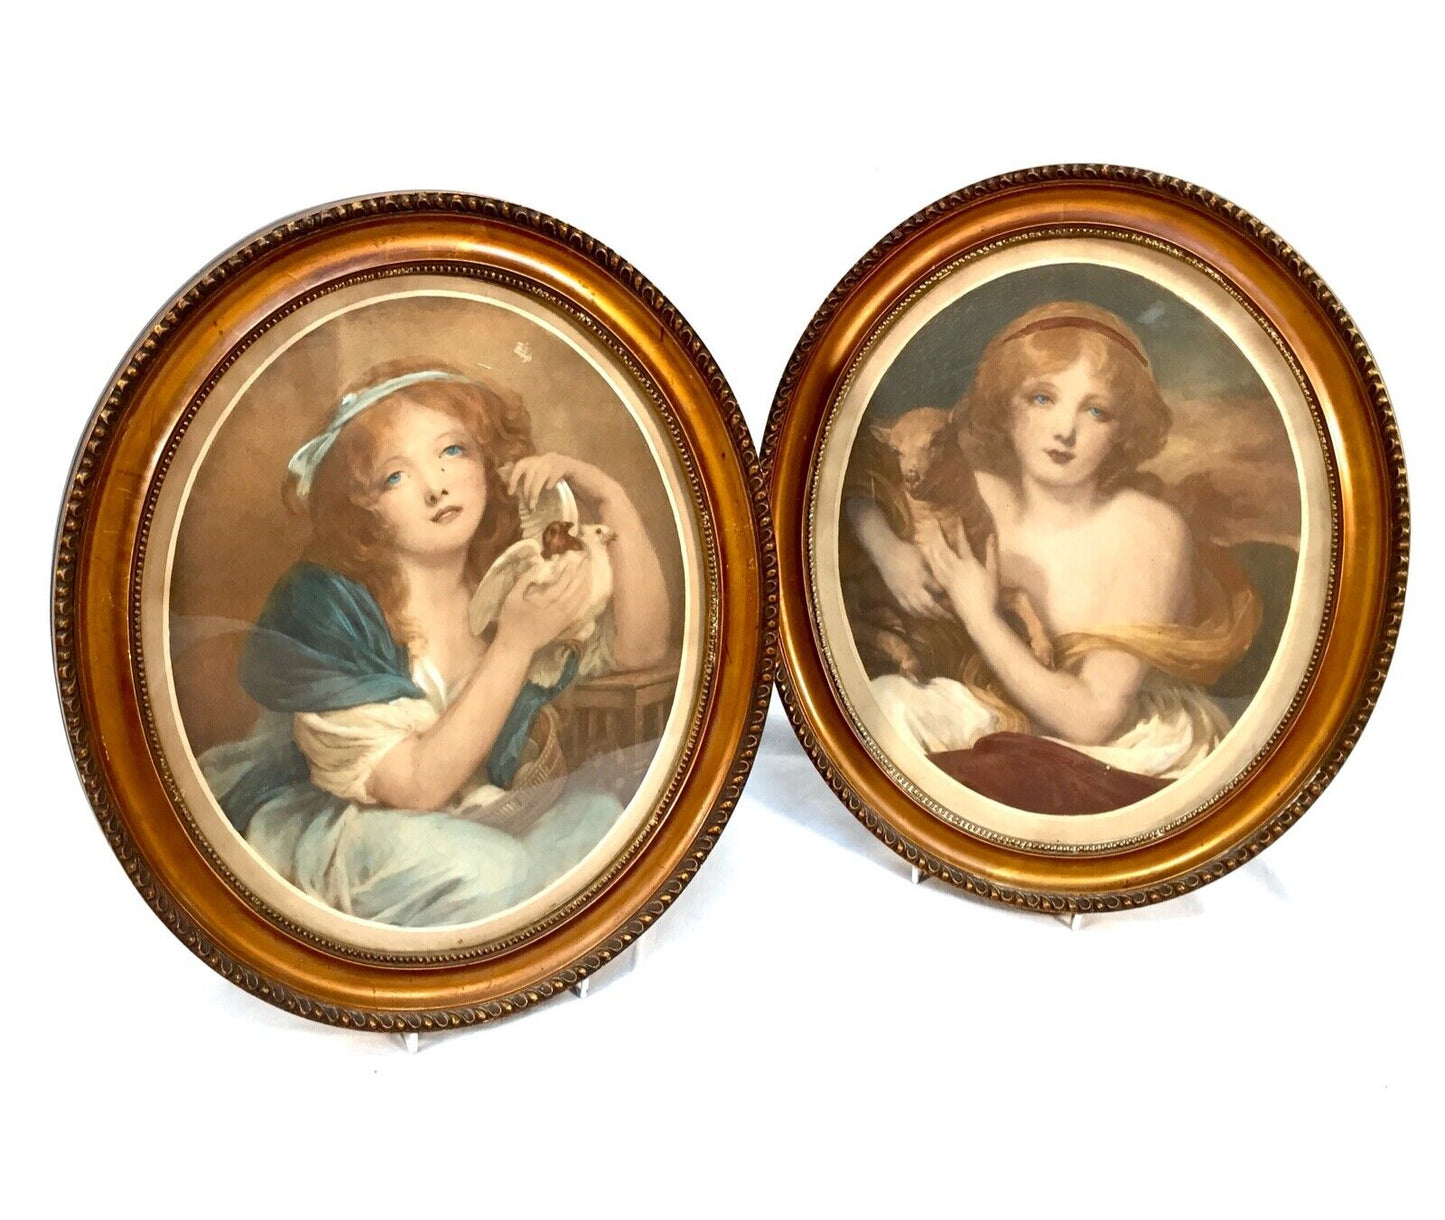 Antique Pair of Art Painting Prints on Board by Jean Baptiste Greuze / Framed